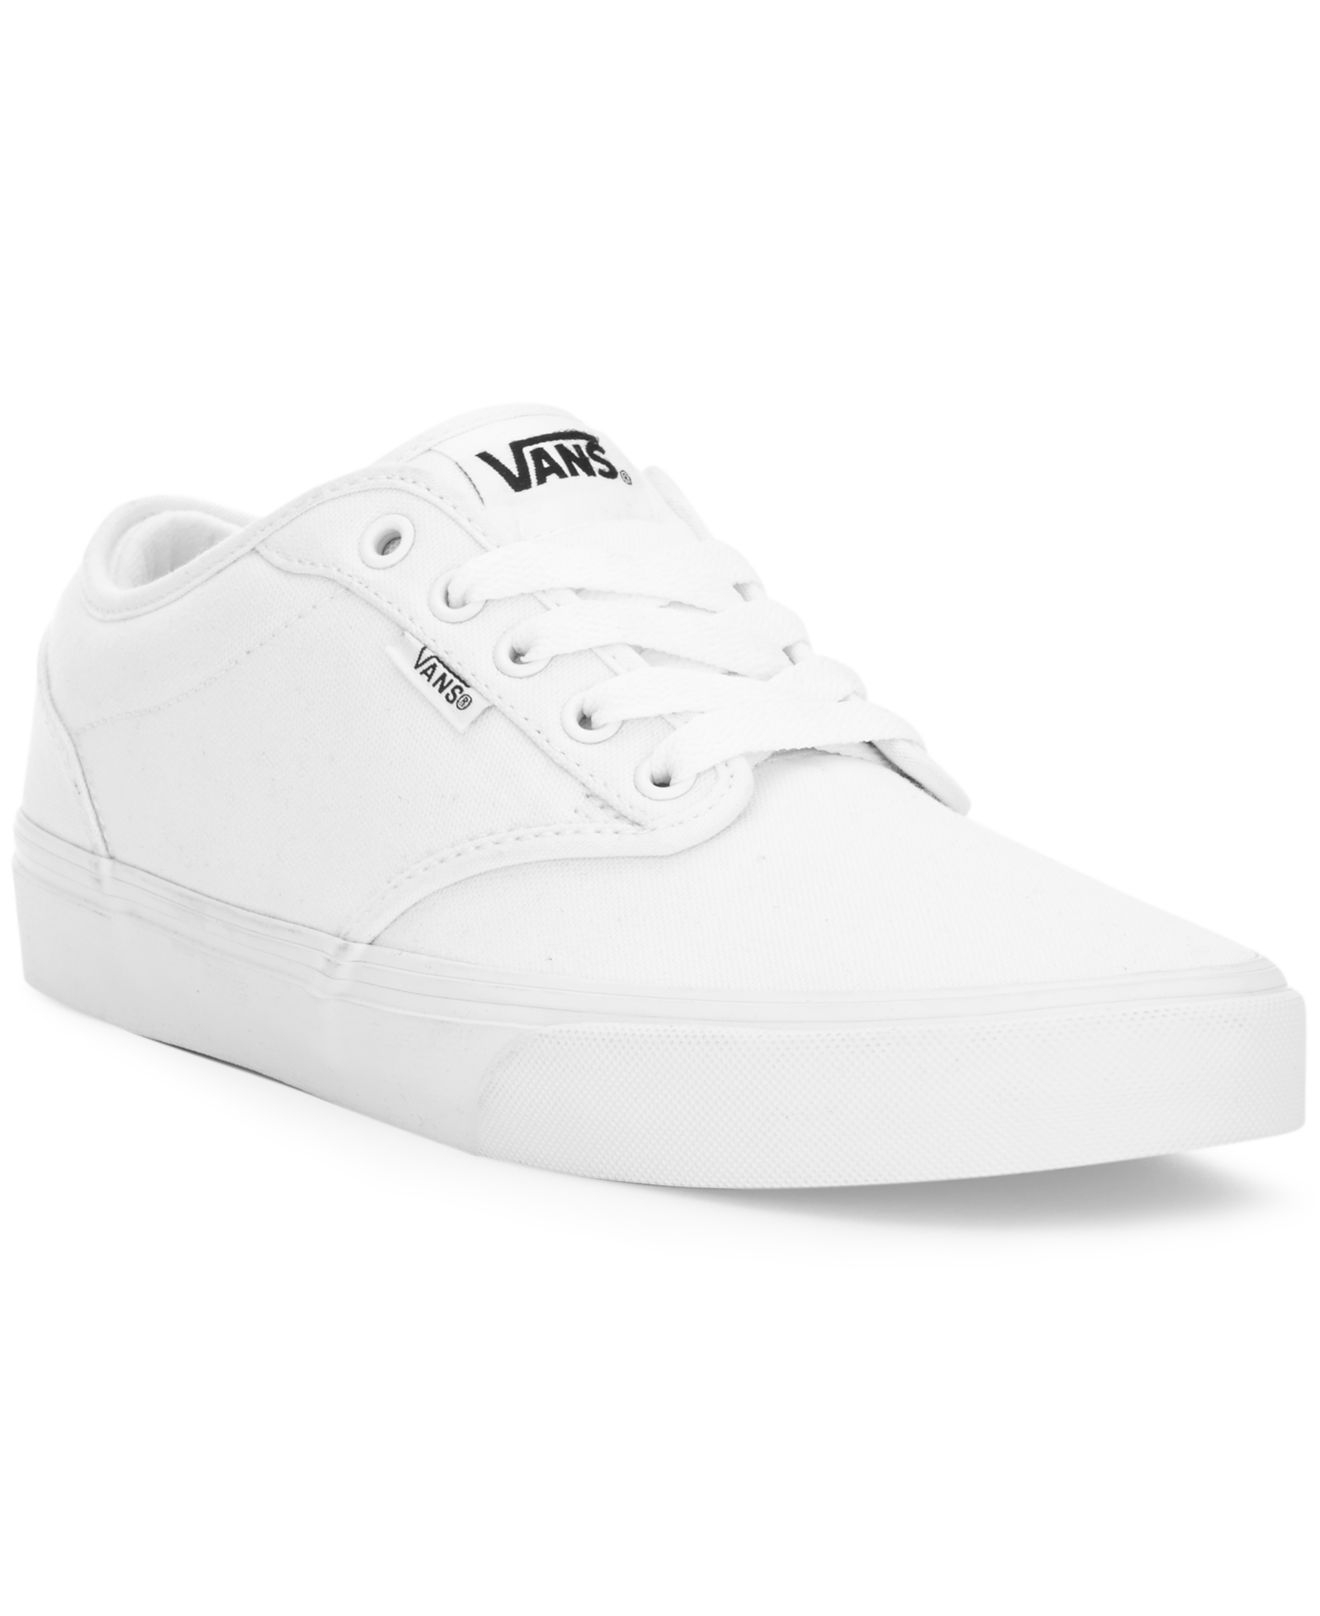 Lyst - Vans Atwood Sneakers in White for Men